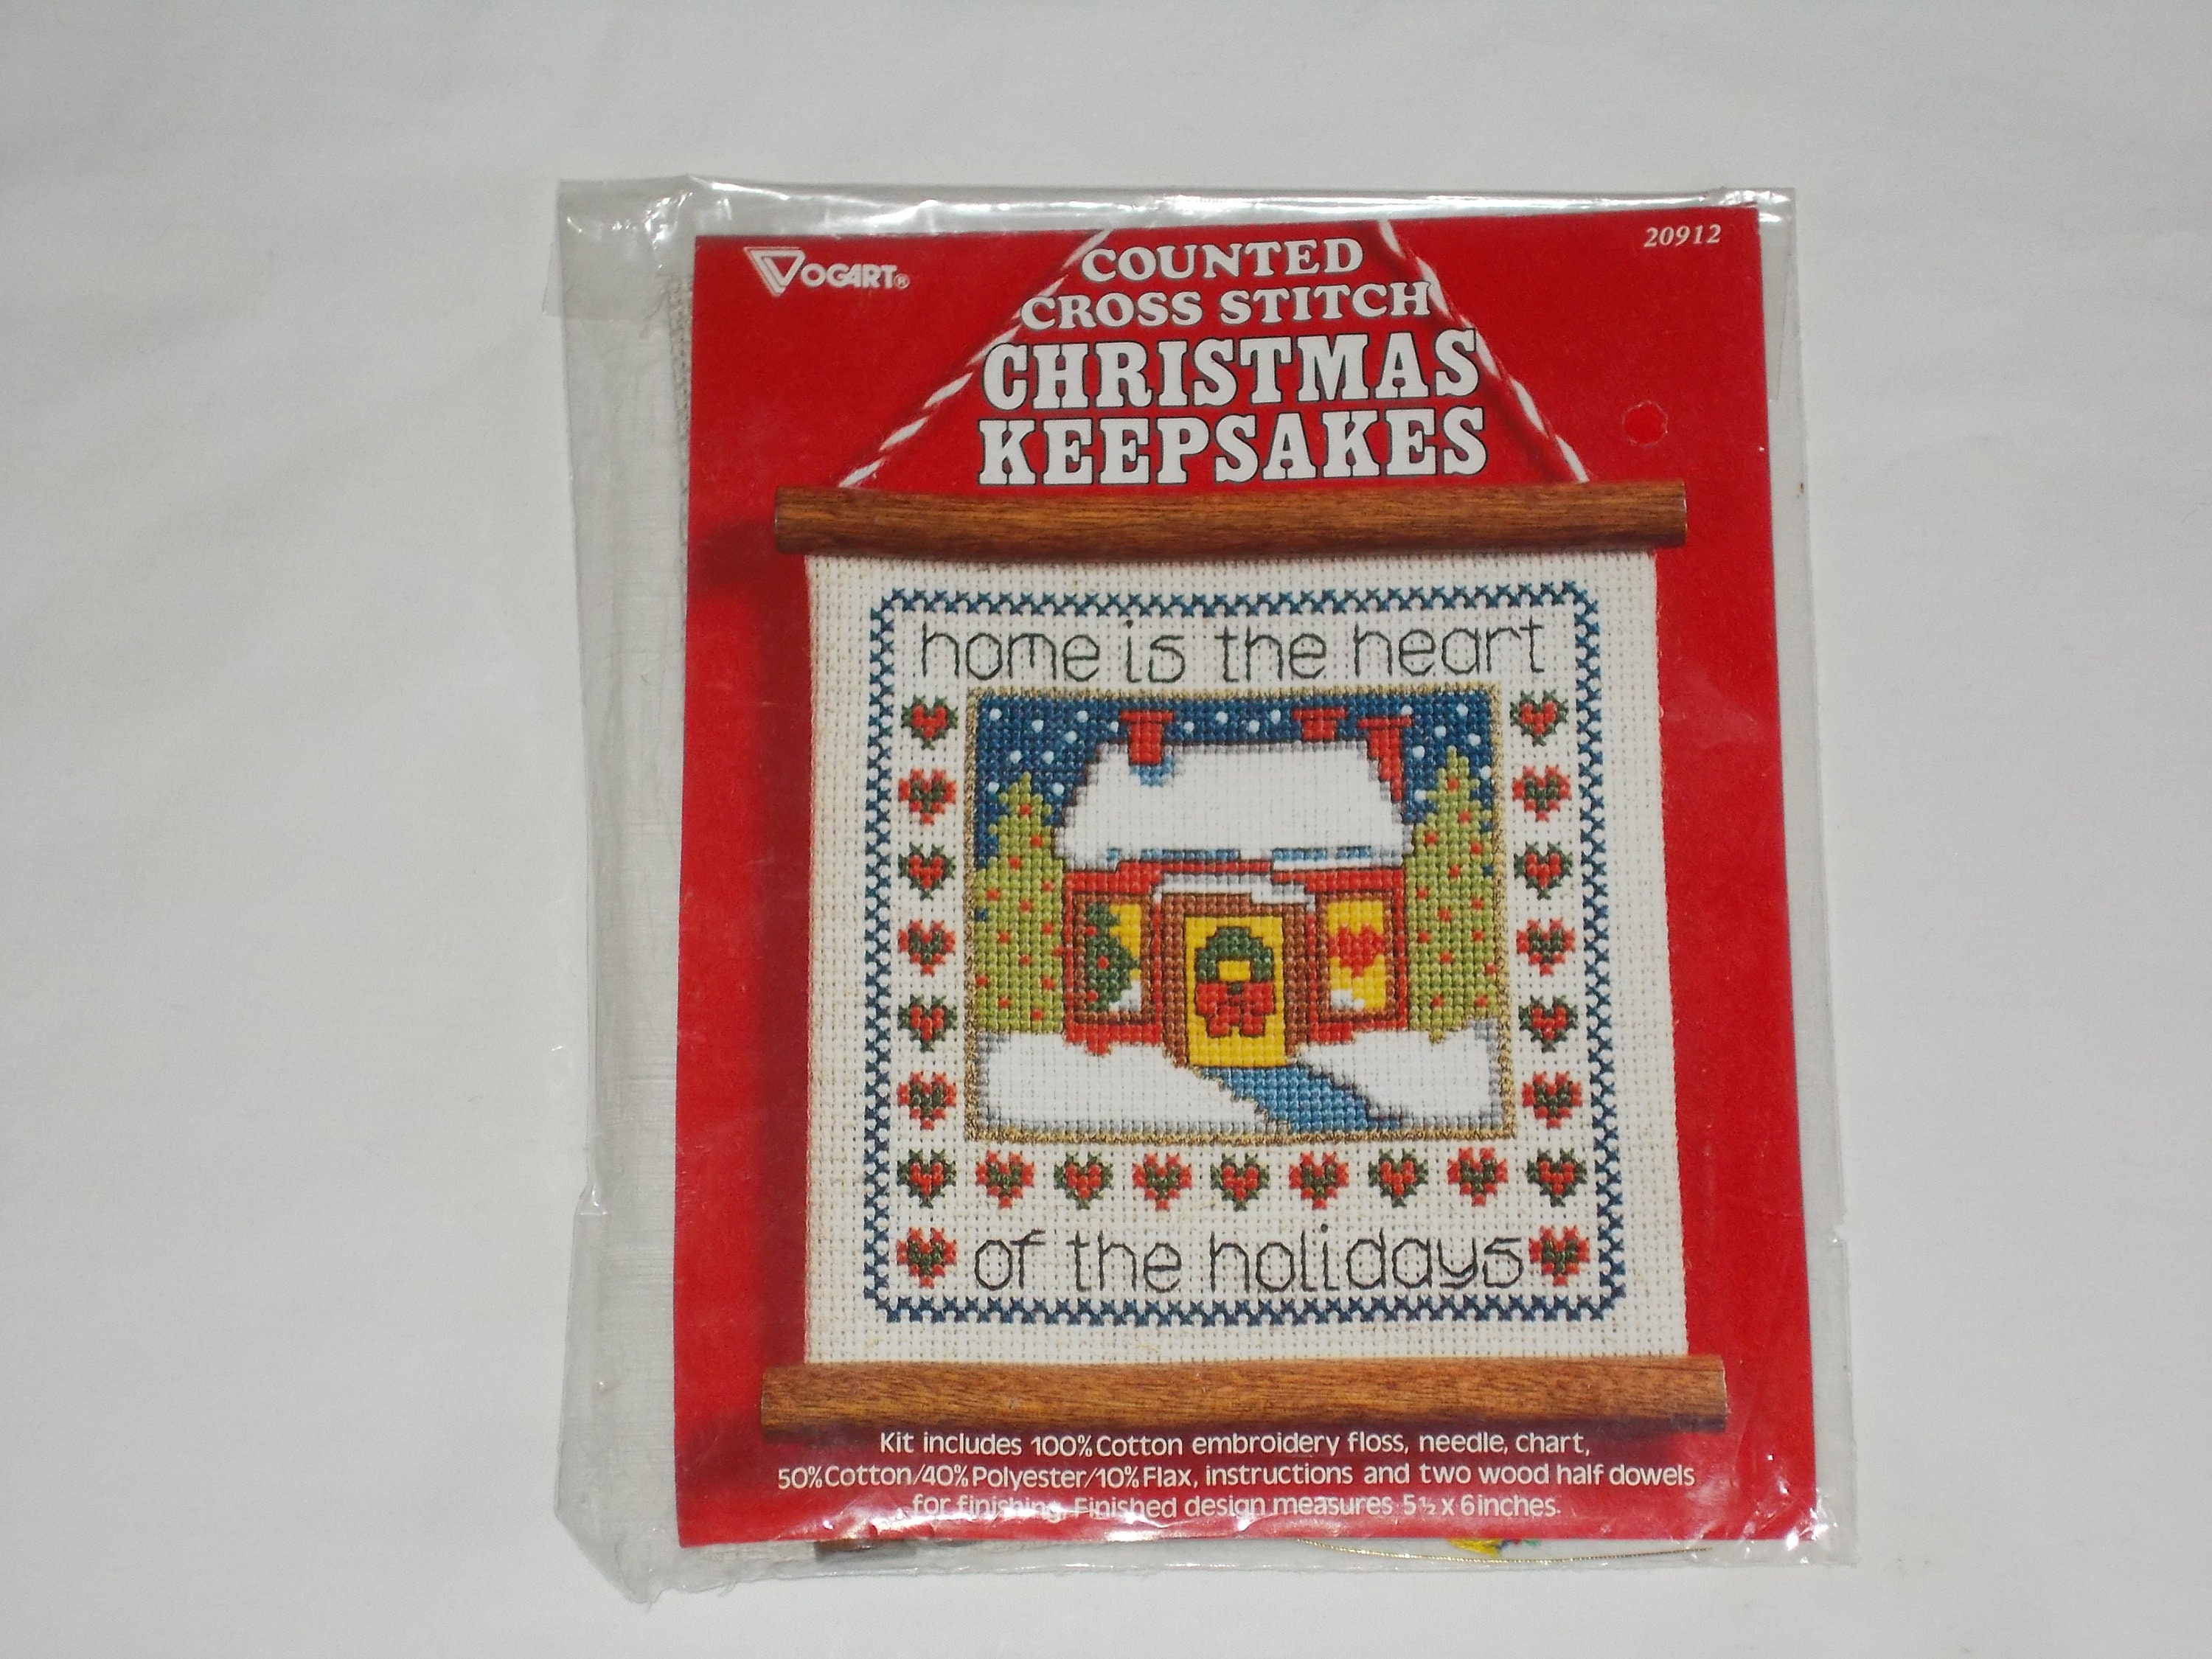 Vintage Vogart Crafts The Heritage Collection Four Placemats Embroidery Kit 8738B Country Cross Stitch NOS NEW